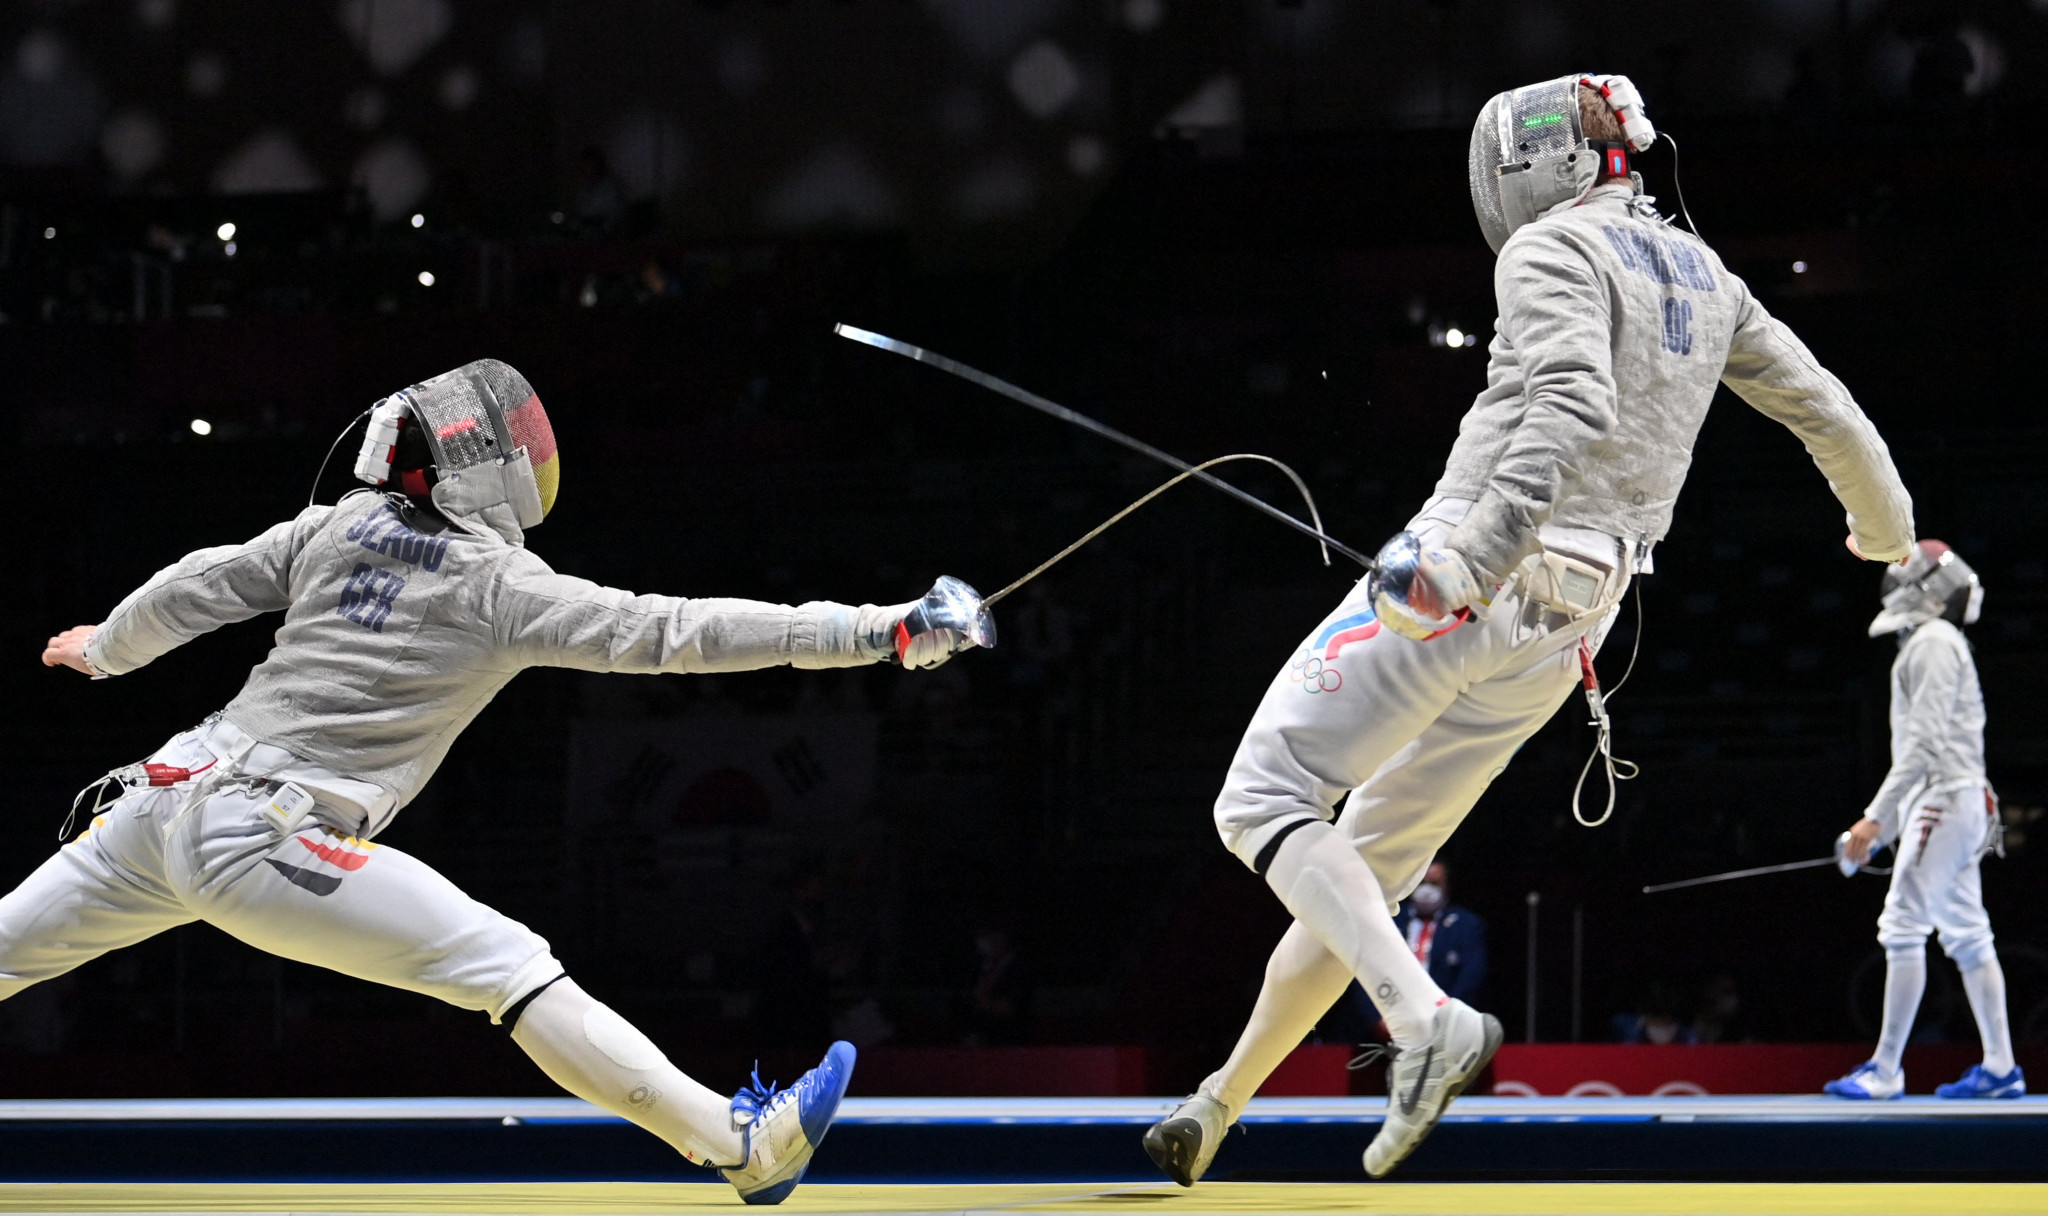 Russian fencer Danilenko refuses to compete as neutral and claims FIE conditions "unfair"